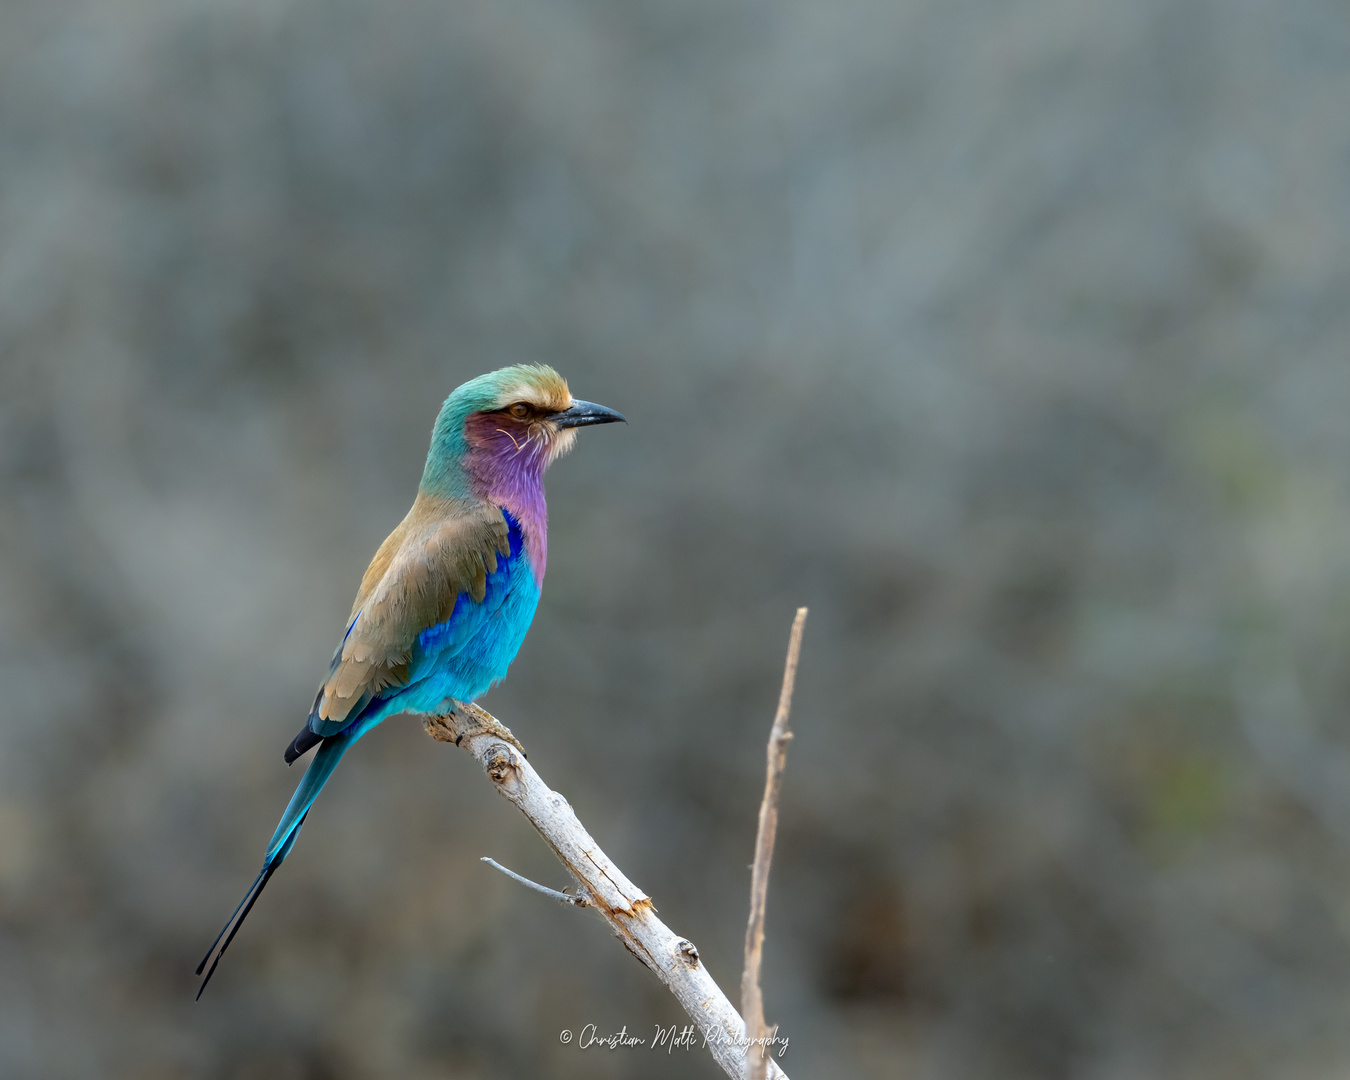 Rollier à longs brins - Lilac-breasted roller